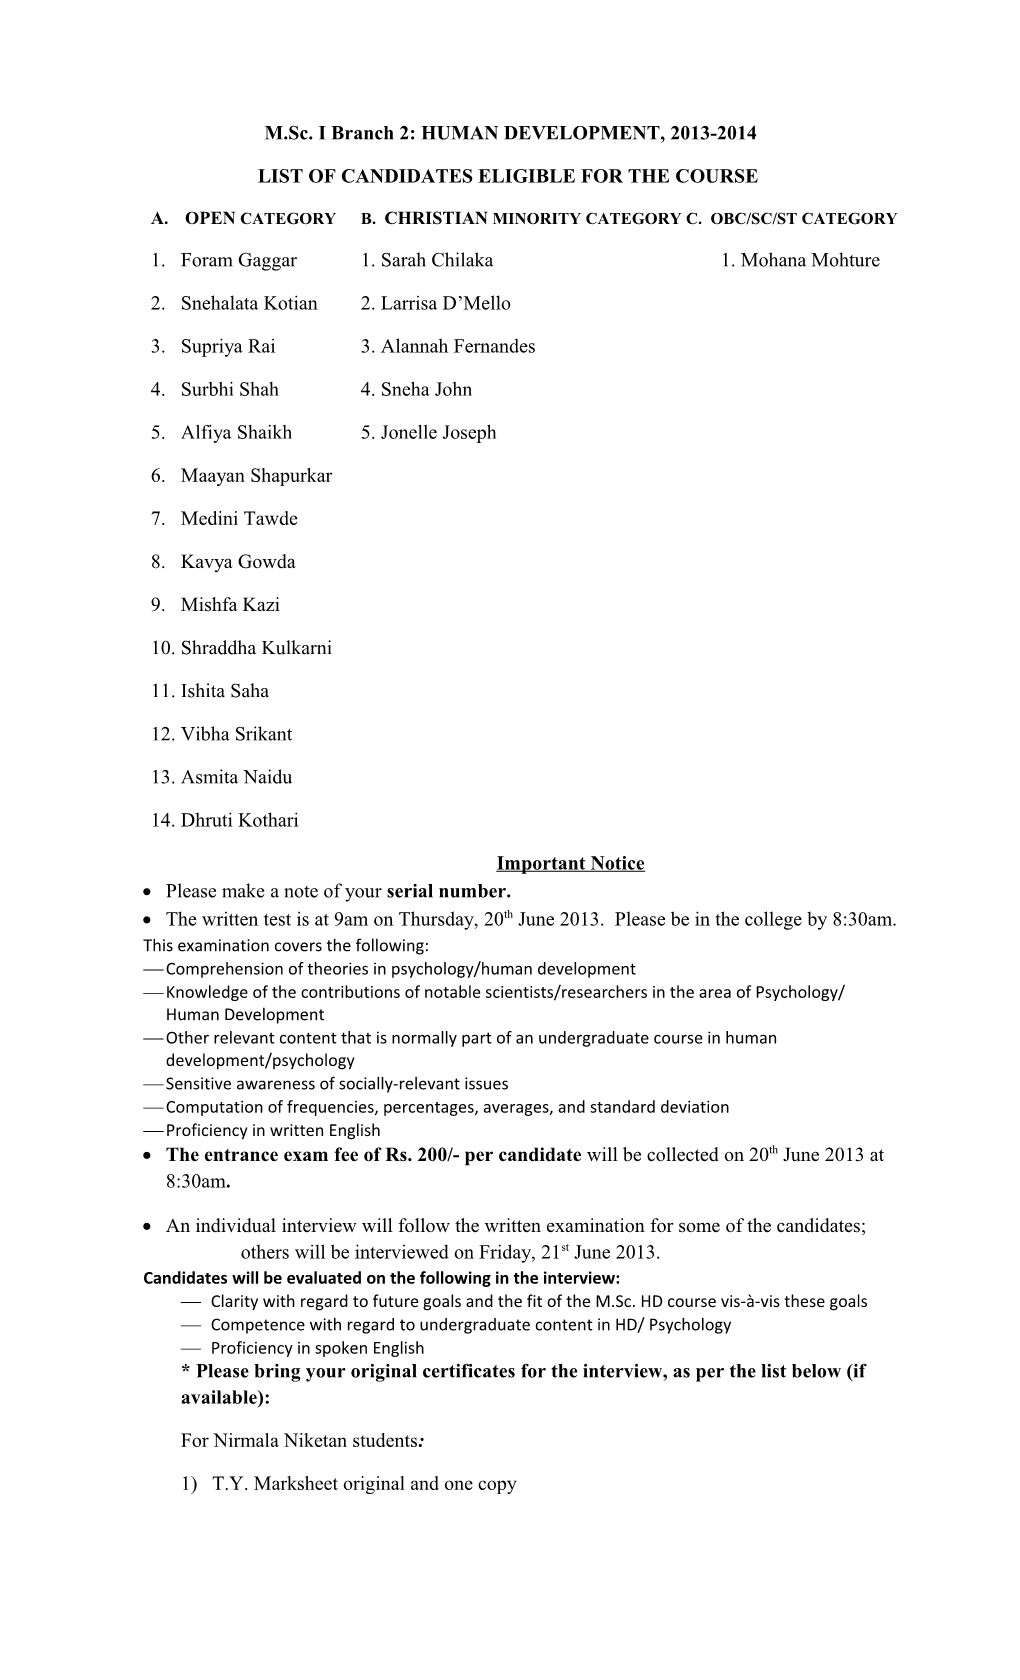 List of Candidates Eligible for the Course